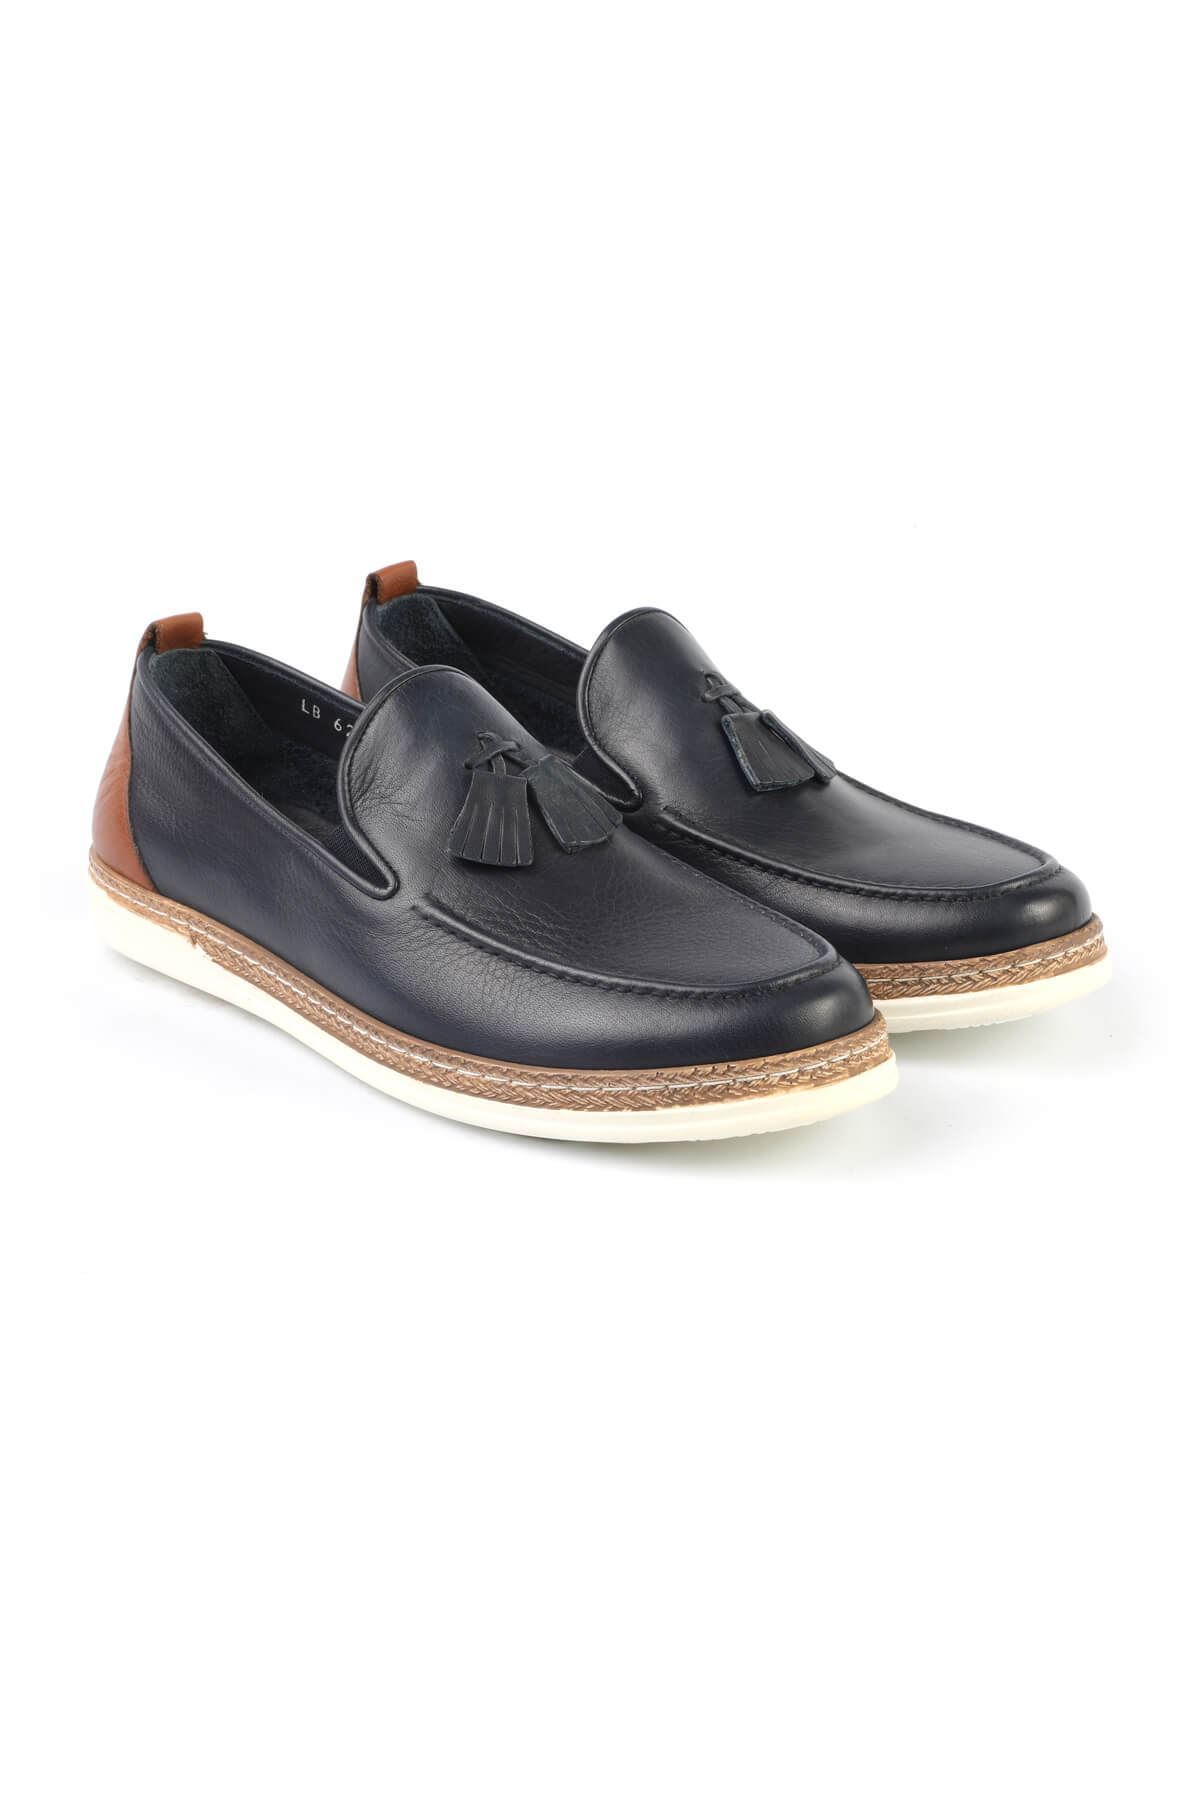 Libero C625 Navy Blue Loafer Shoes